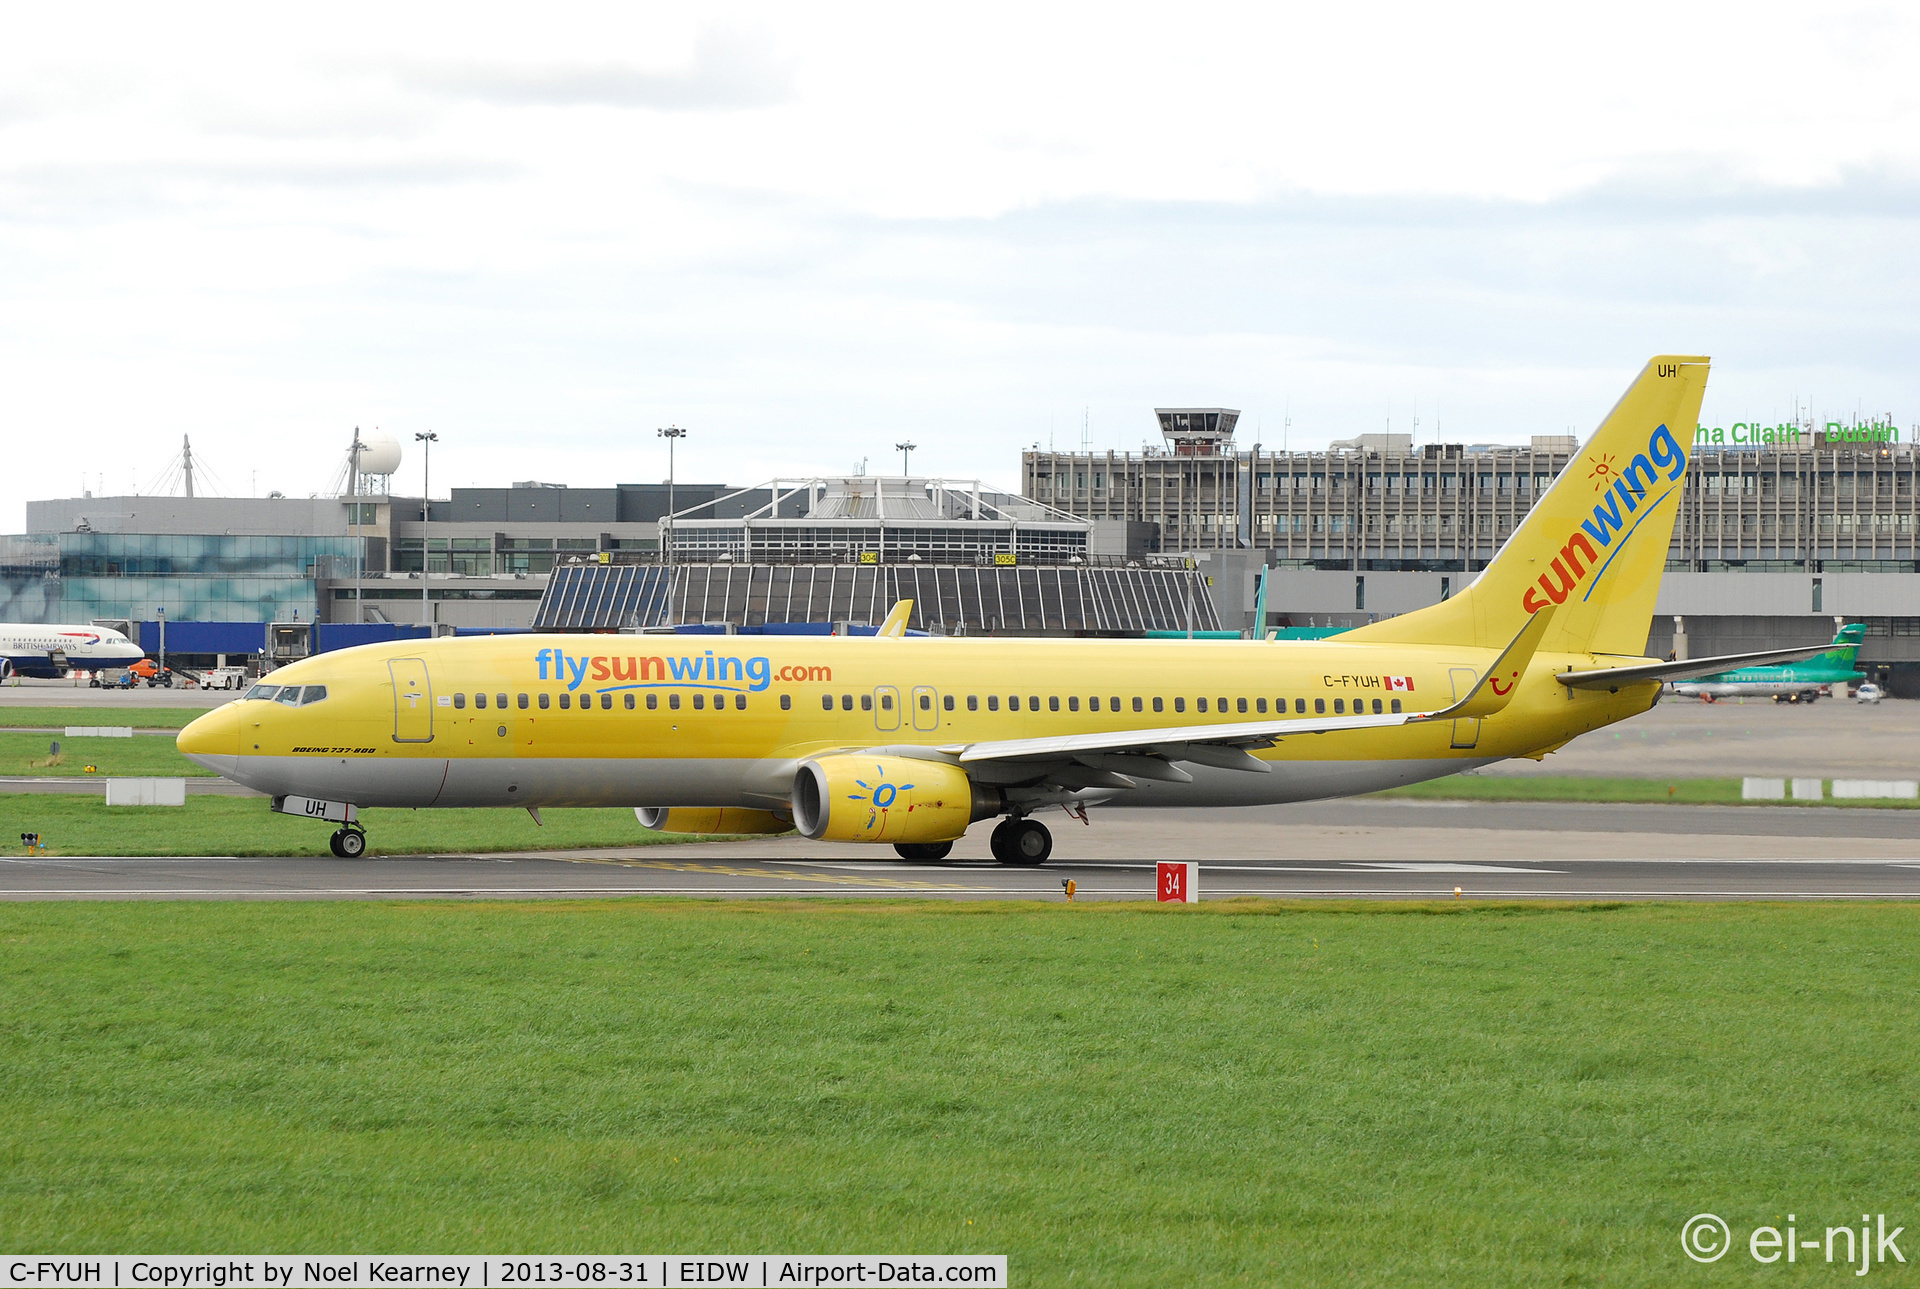 C-FYUH, 2006 Boeing 737-8K5 C/N 34689, On lease to Thomson for holiday charters and seen about to depart off Rwy28 at Dublin.